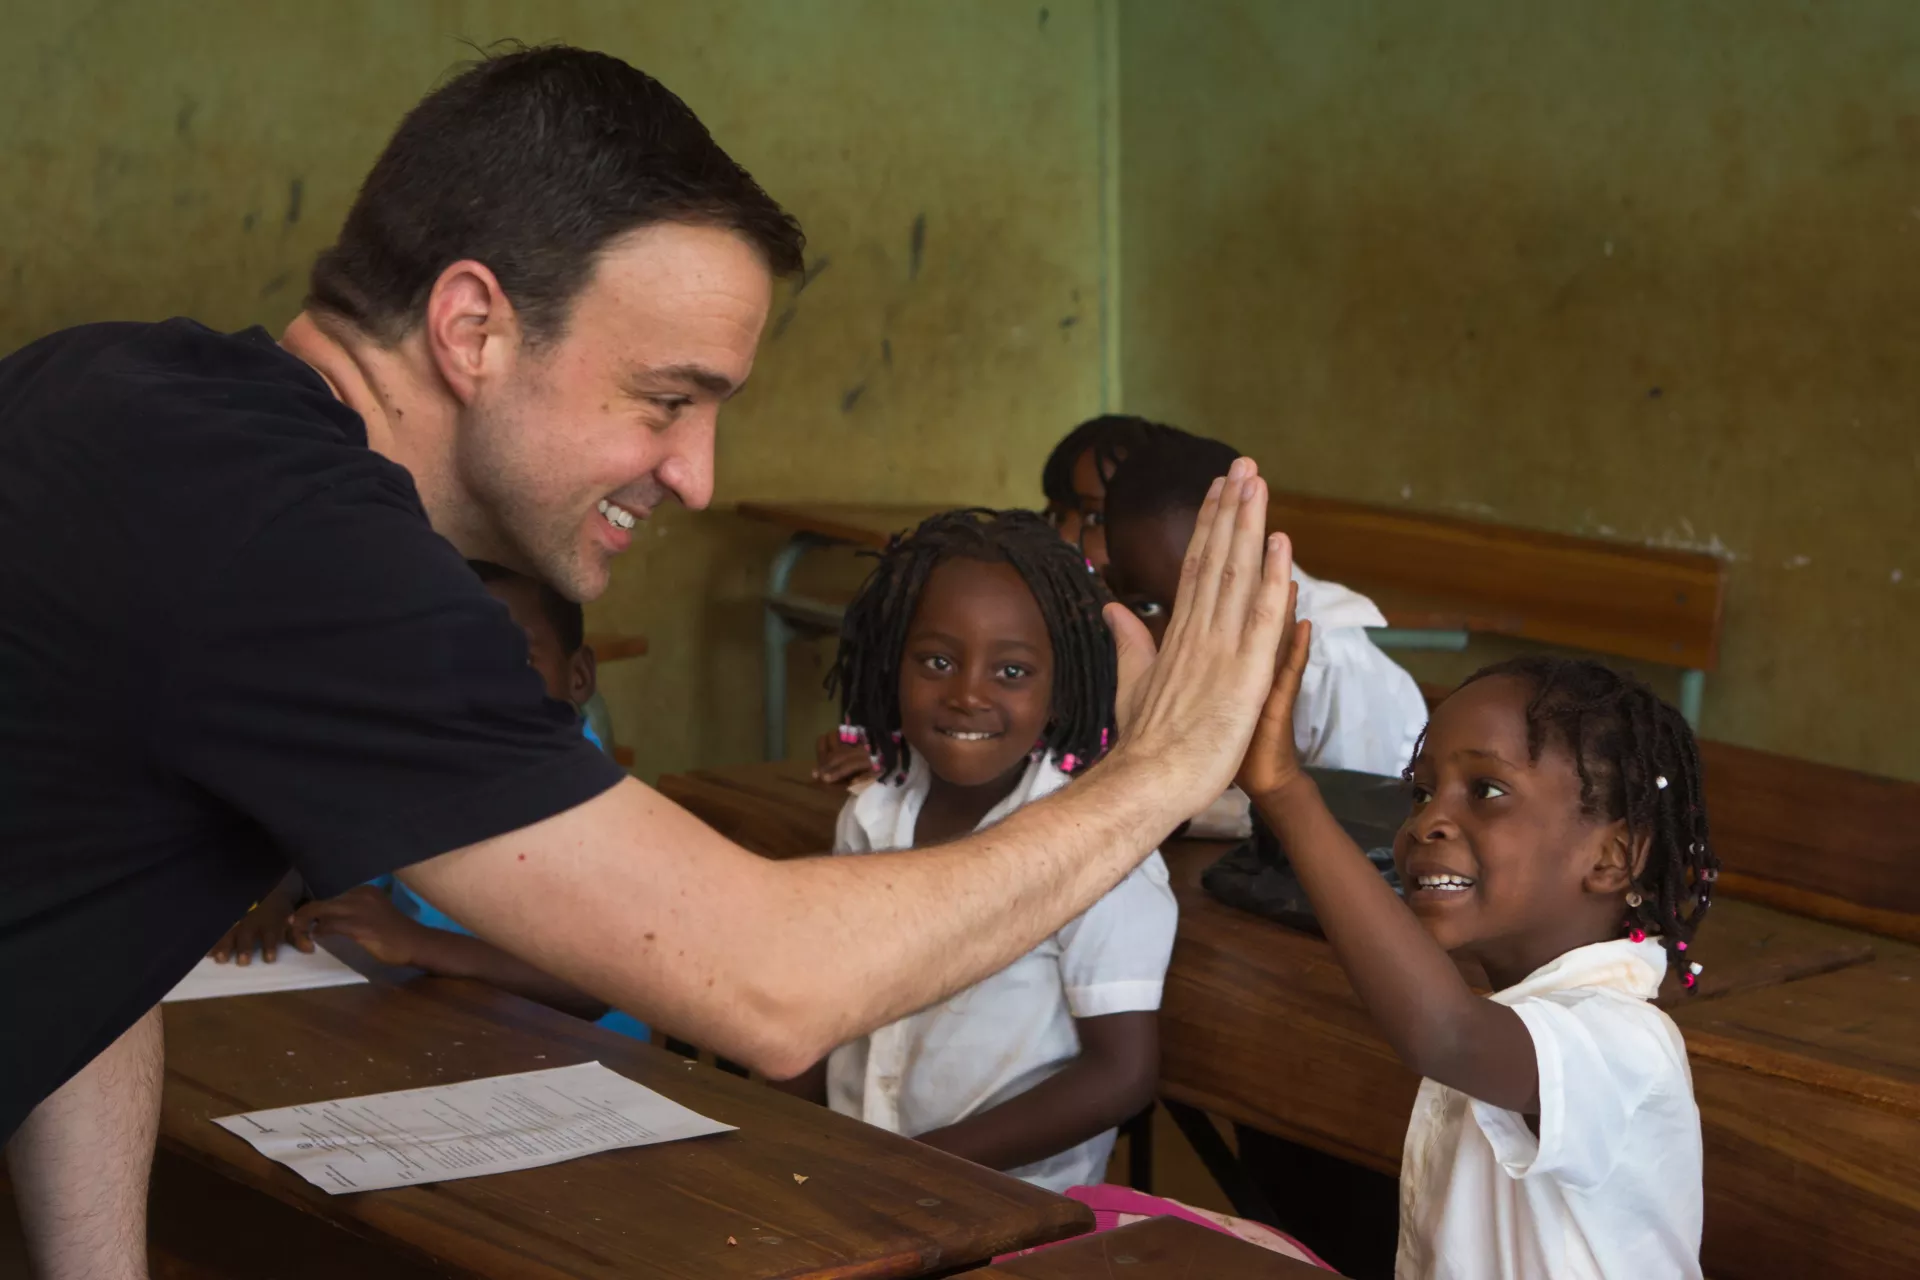 Kevin Frey seen hi5-ing a young girl in a classroom